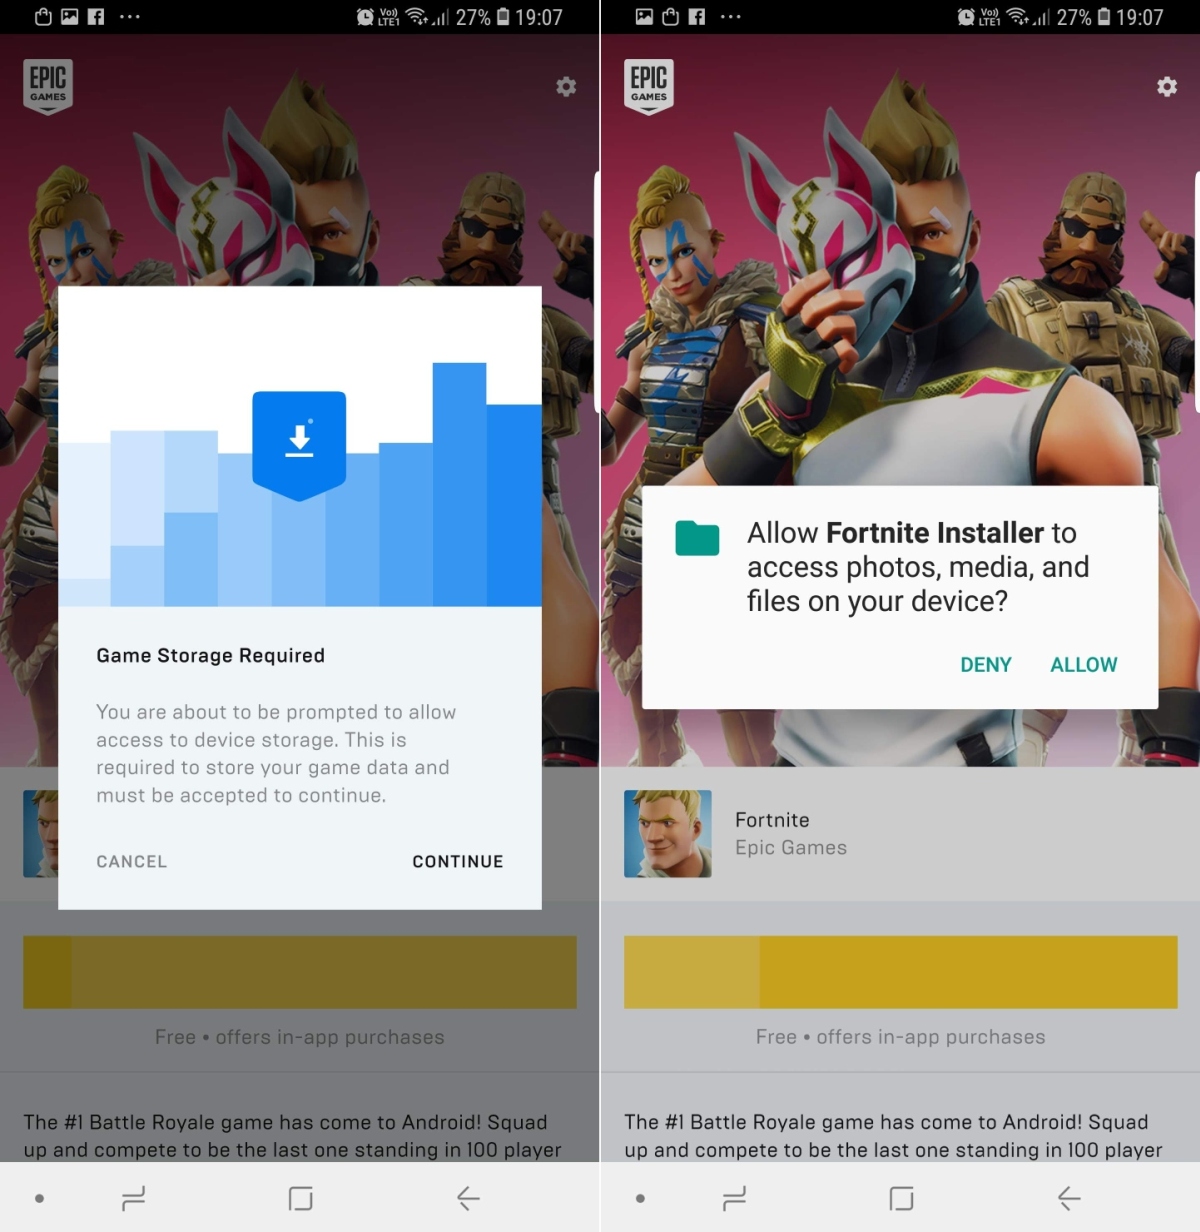 How To Download Fortnite For Android On Your Samsung Galaxy Device - once fortnite is installed you can tap the launch button inside the fortnite installer app to start the game you can also start the game by tapping its